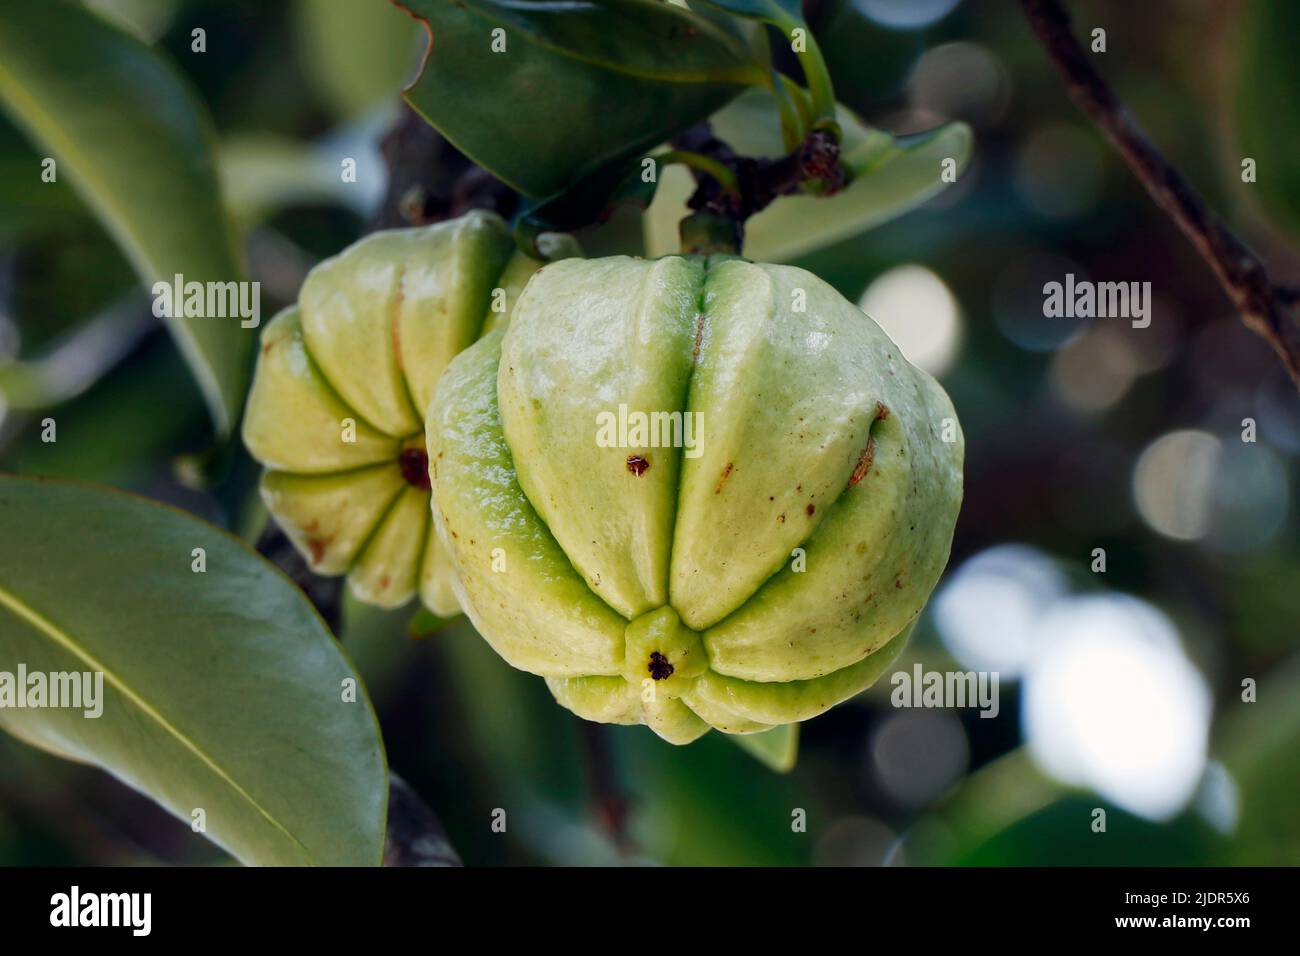 Garcinia gummi-gutta known as Garcinia cambogia as well as brindleberry,comenly use for foods and medicinal purpose Stock Photo